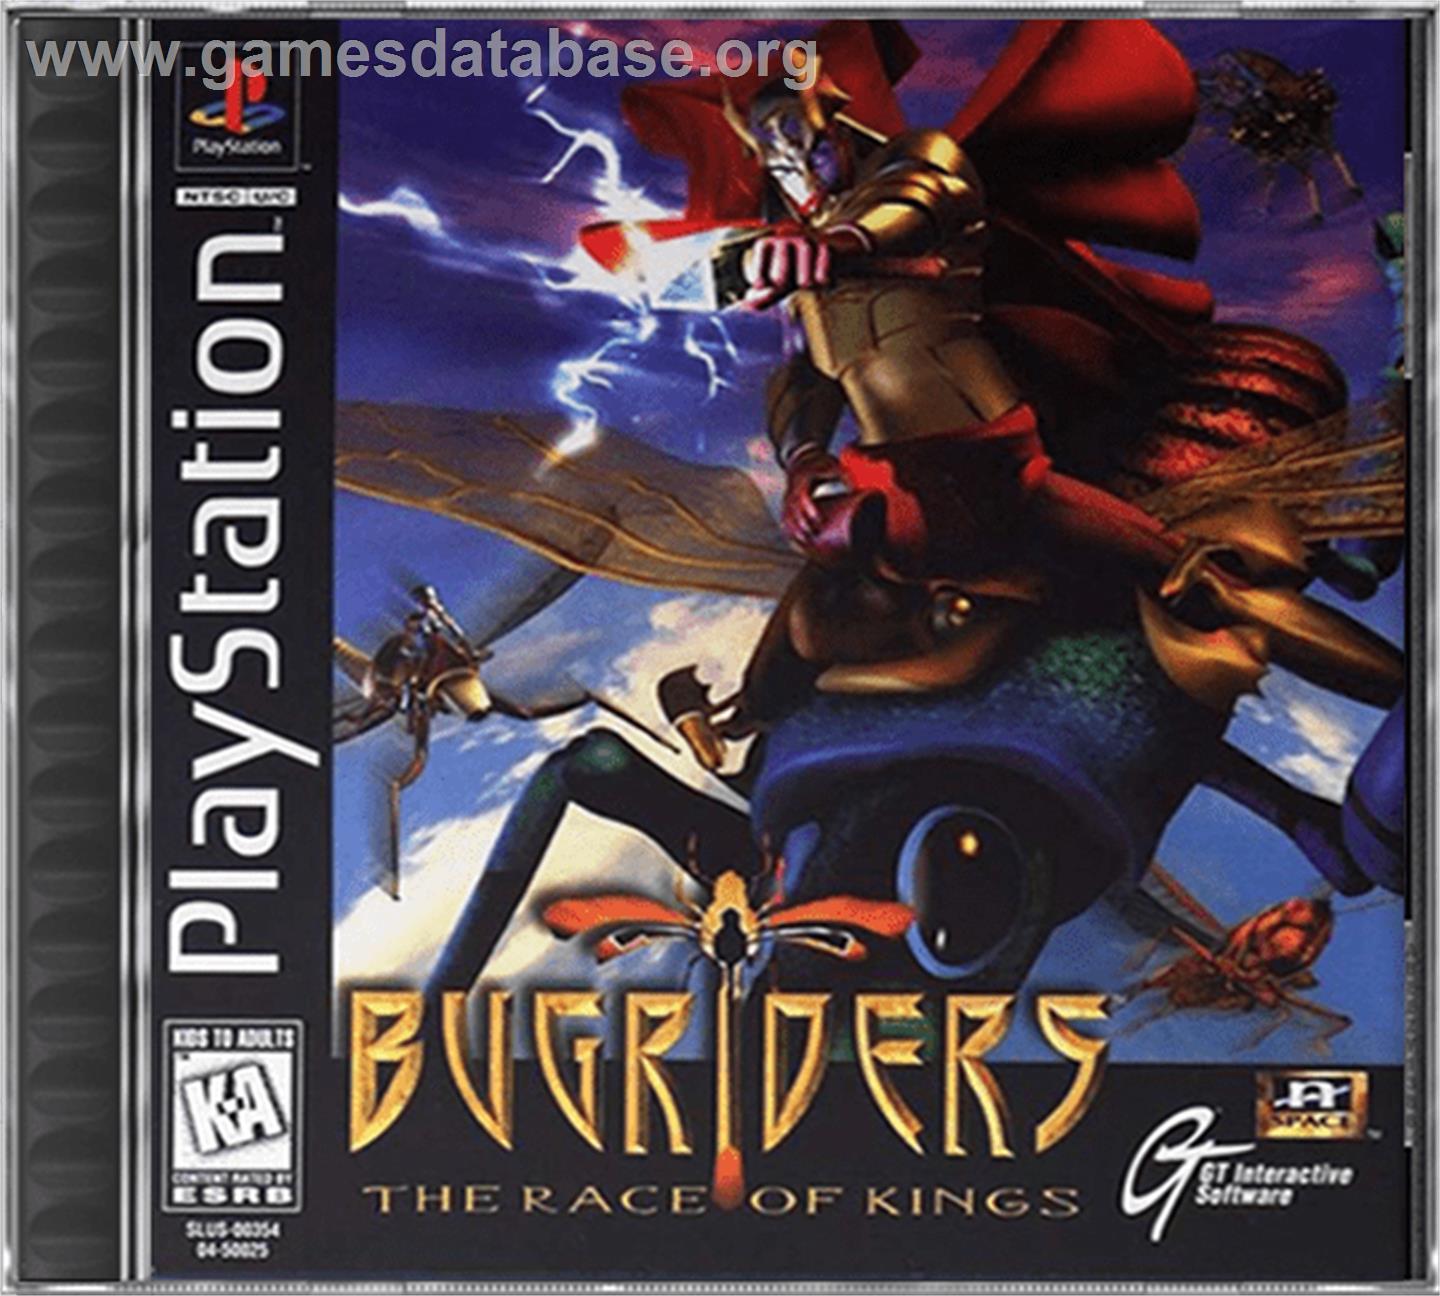 BugRiders: The Race of Kings - Sony Playstation - Artwork - Box